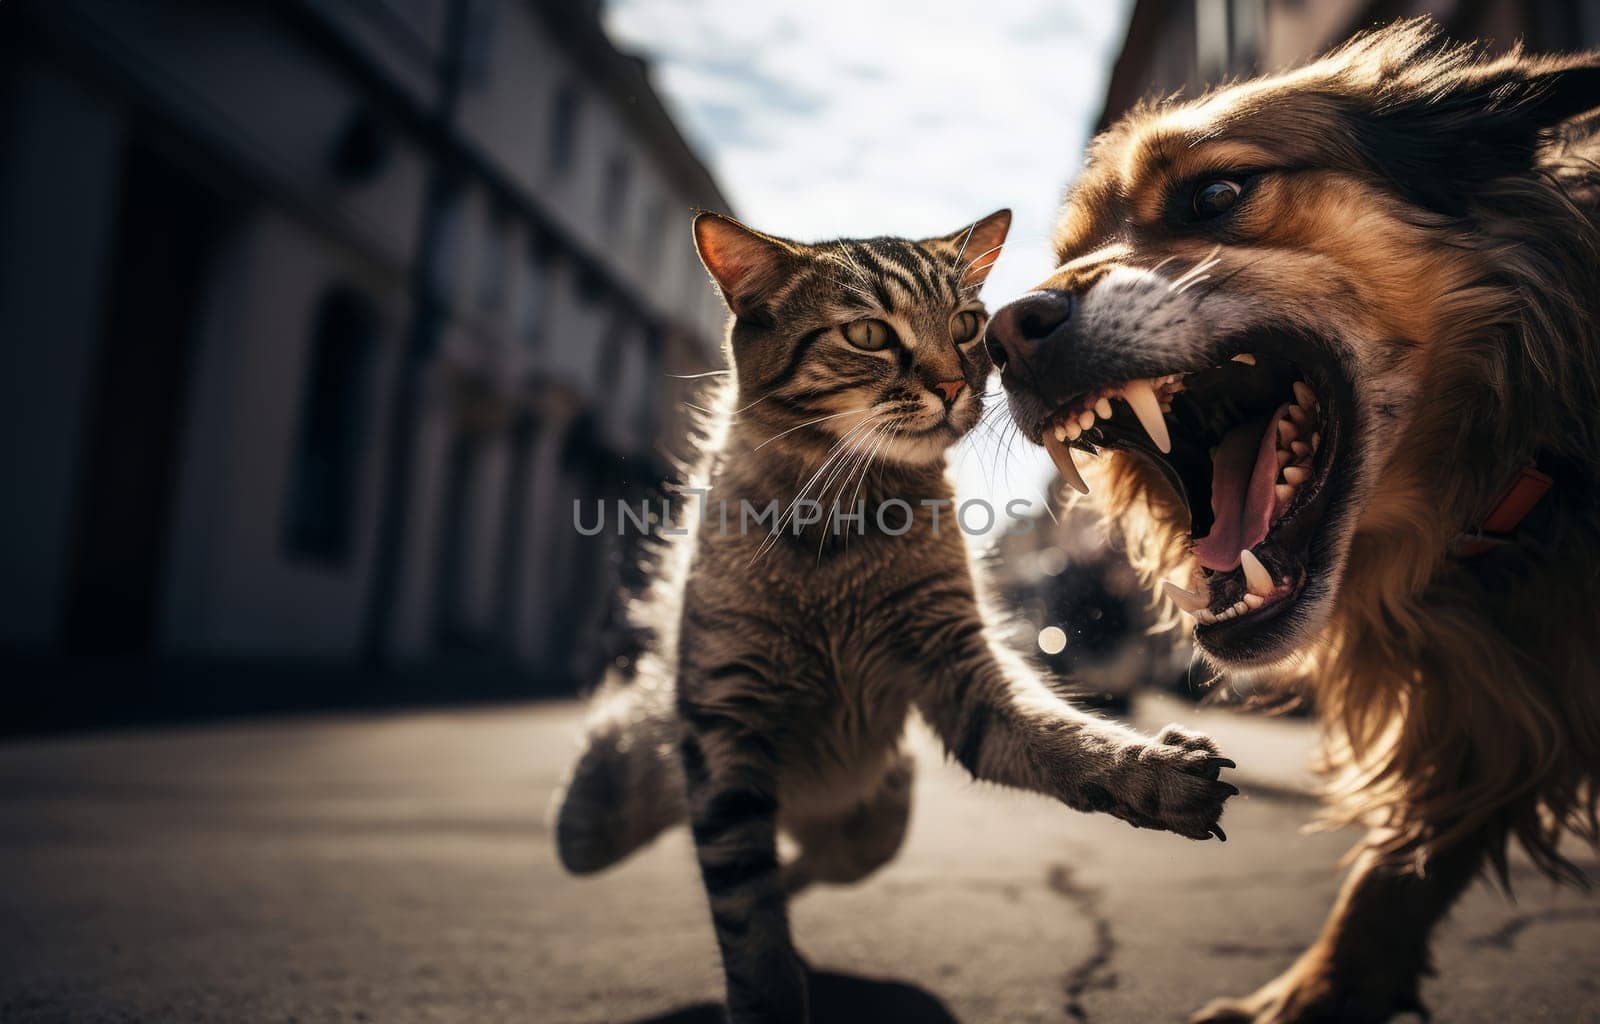 A dangerous street fight unfolds between a cat and a dog, showcasing the intense confrontation between these urban adversaries